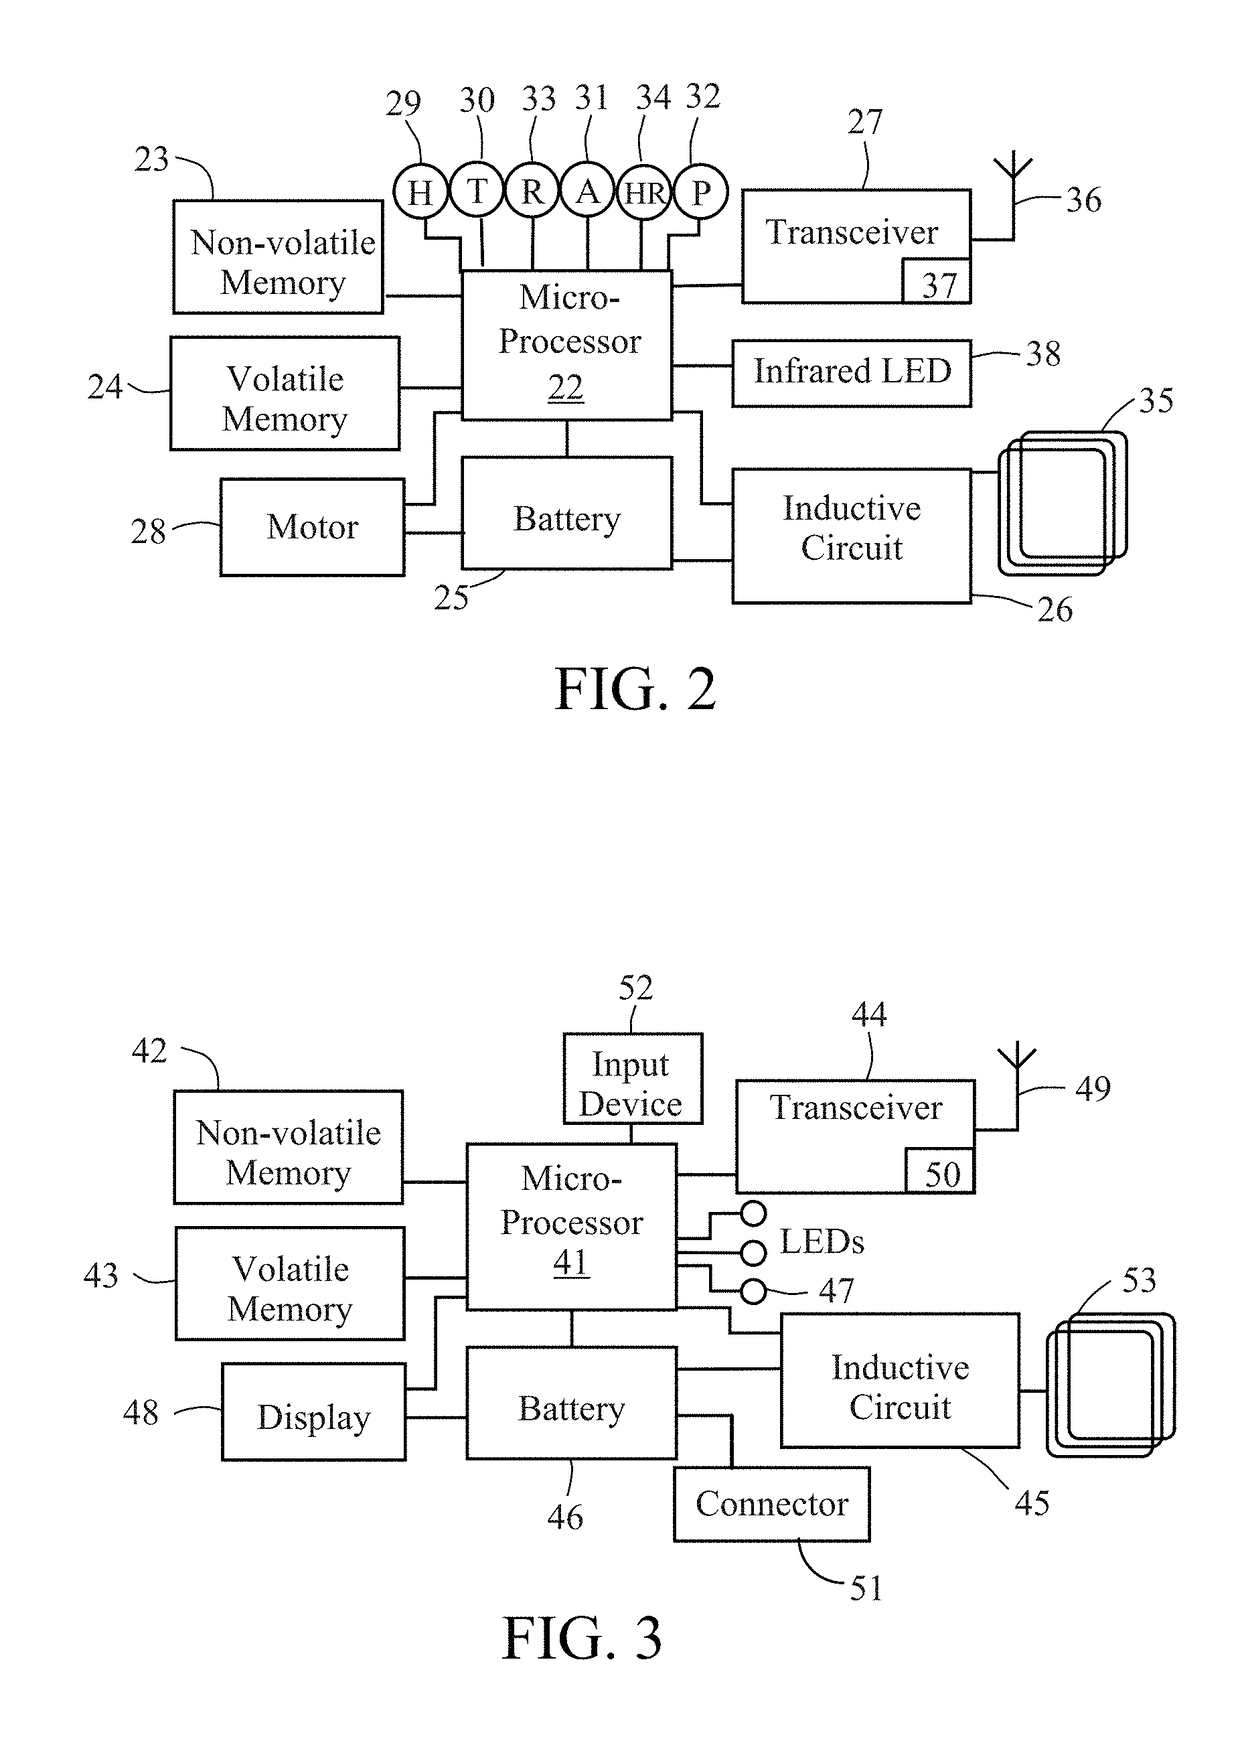 Systems and methods for managing and analyzing data generated by an implantable device